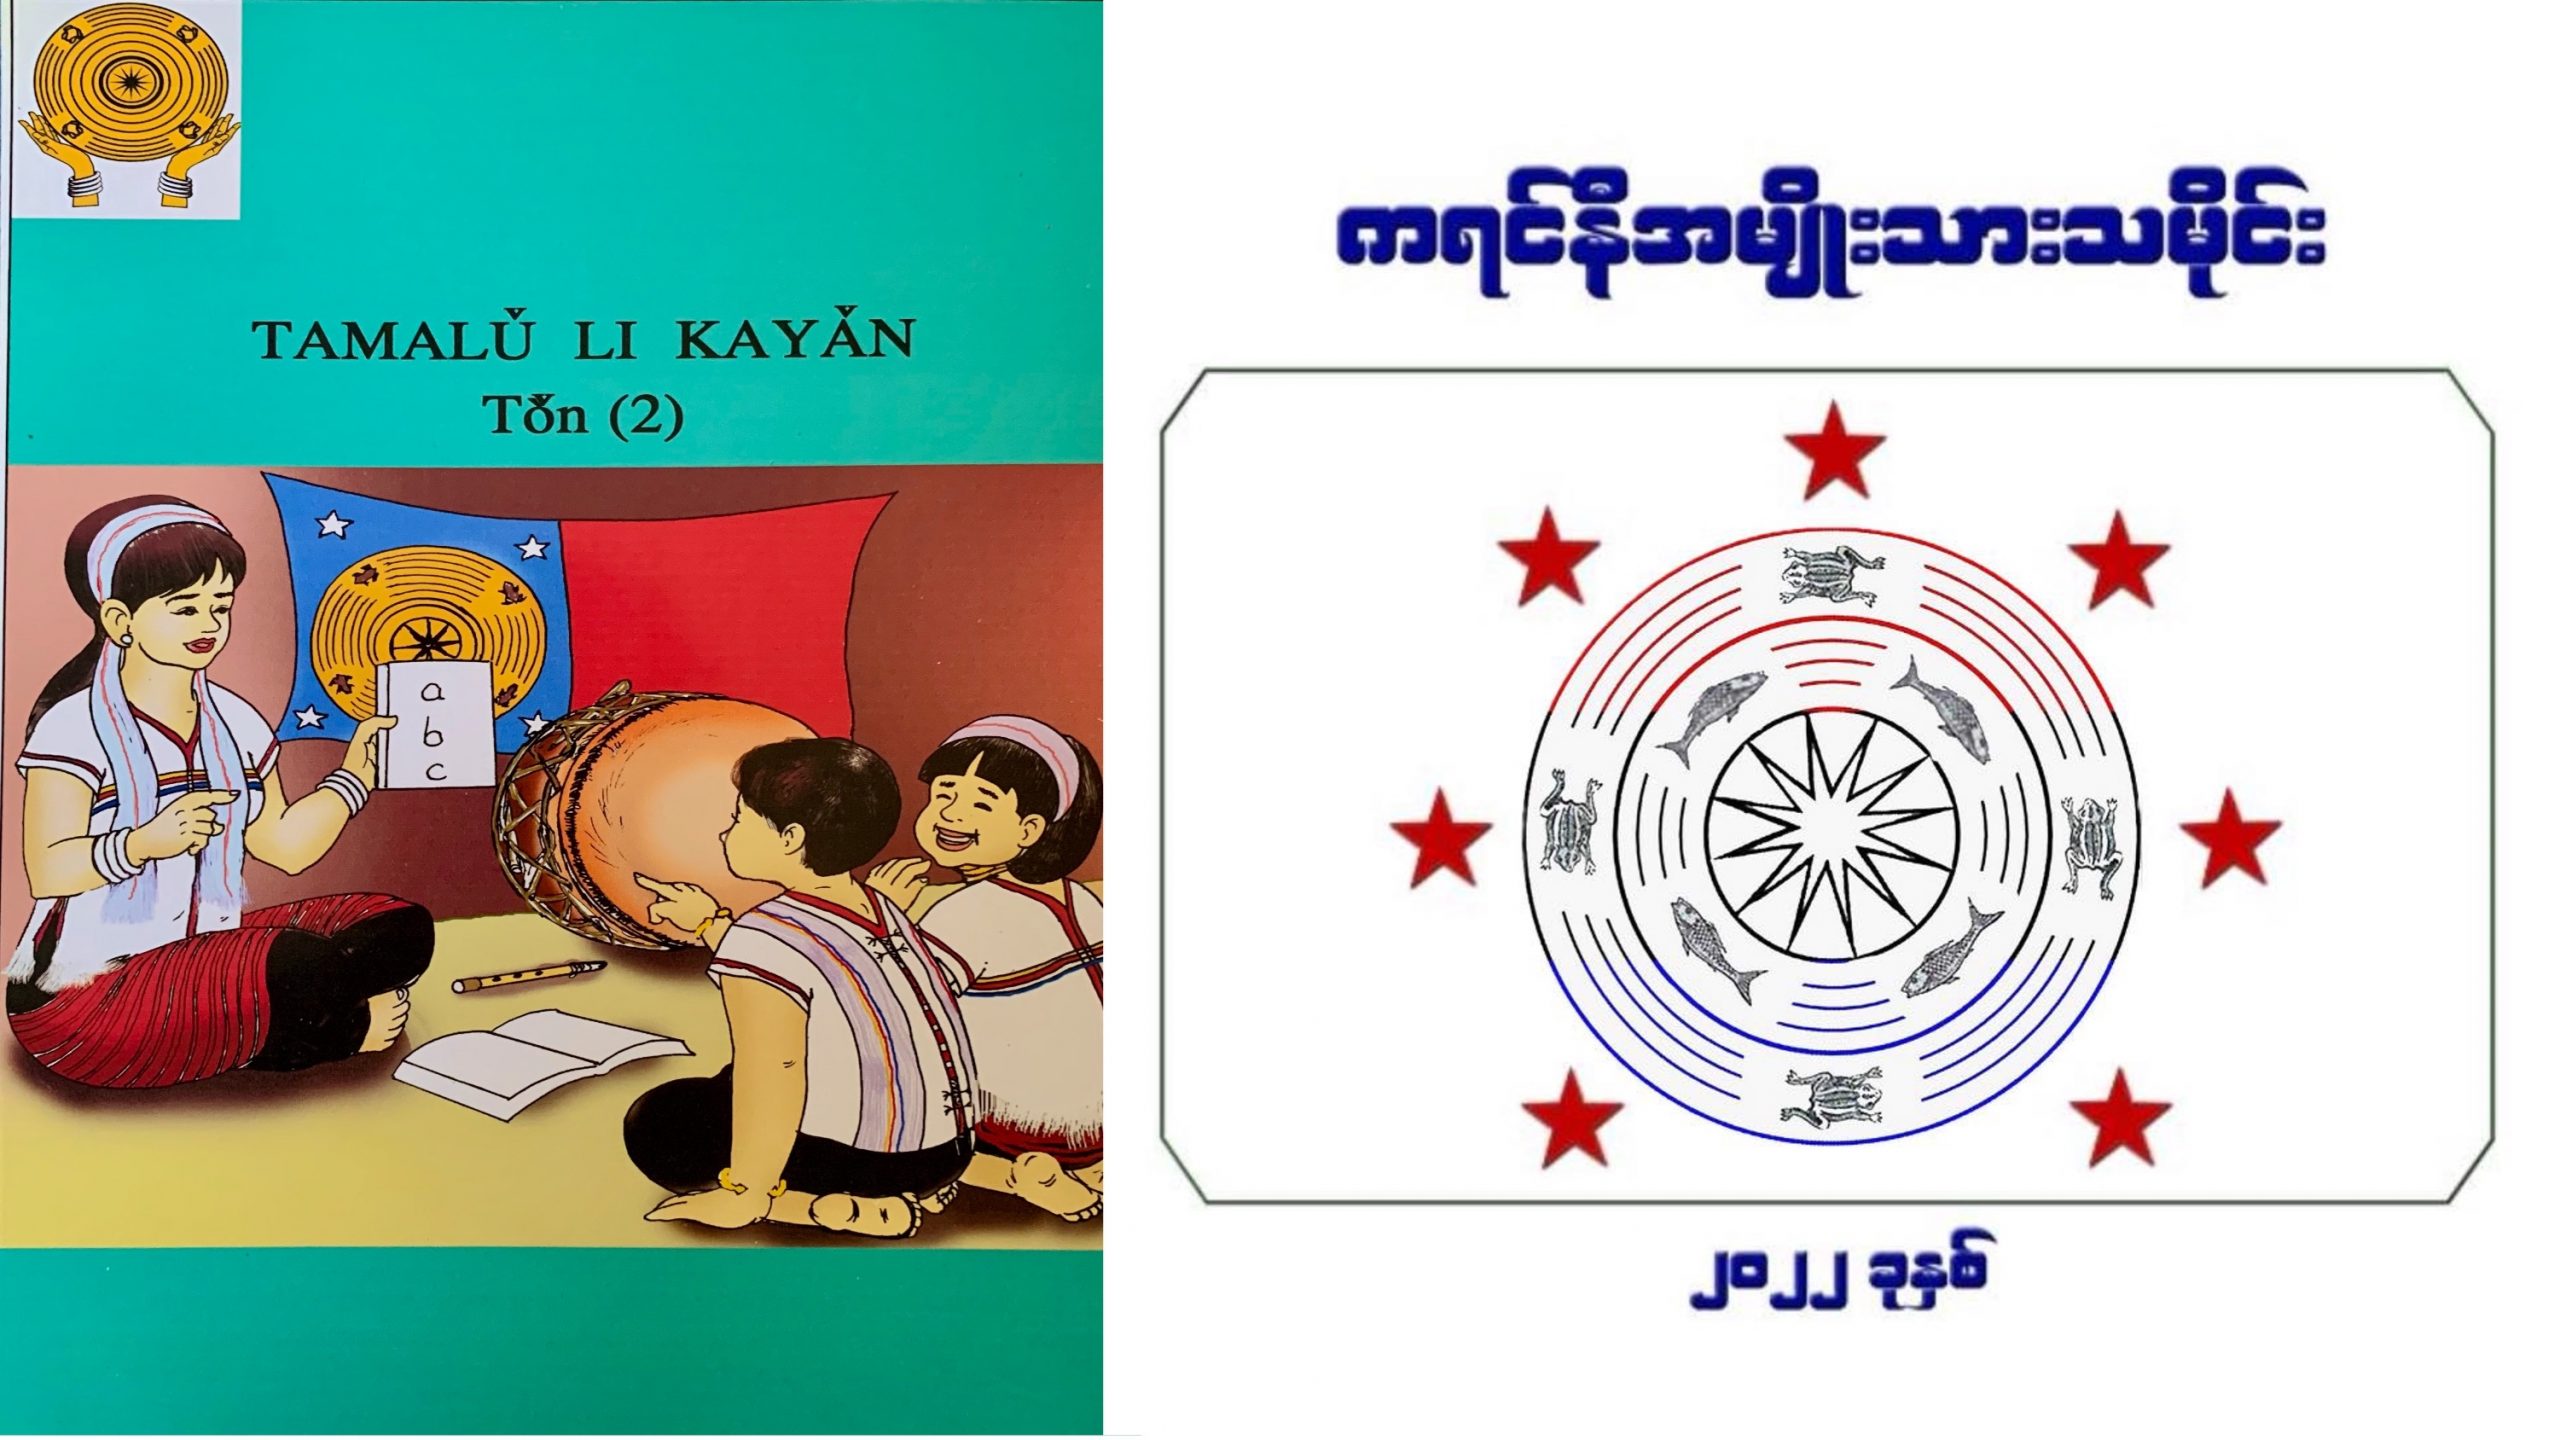 Amendment of the National Education Law and other language-in-education developments following the 2021 military coup in Myanmar (Part 2)